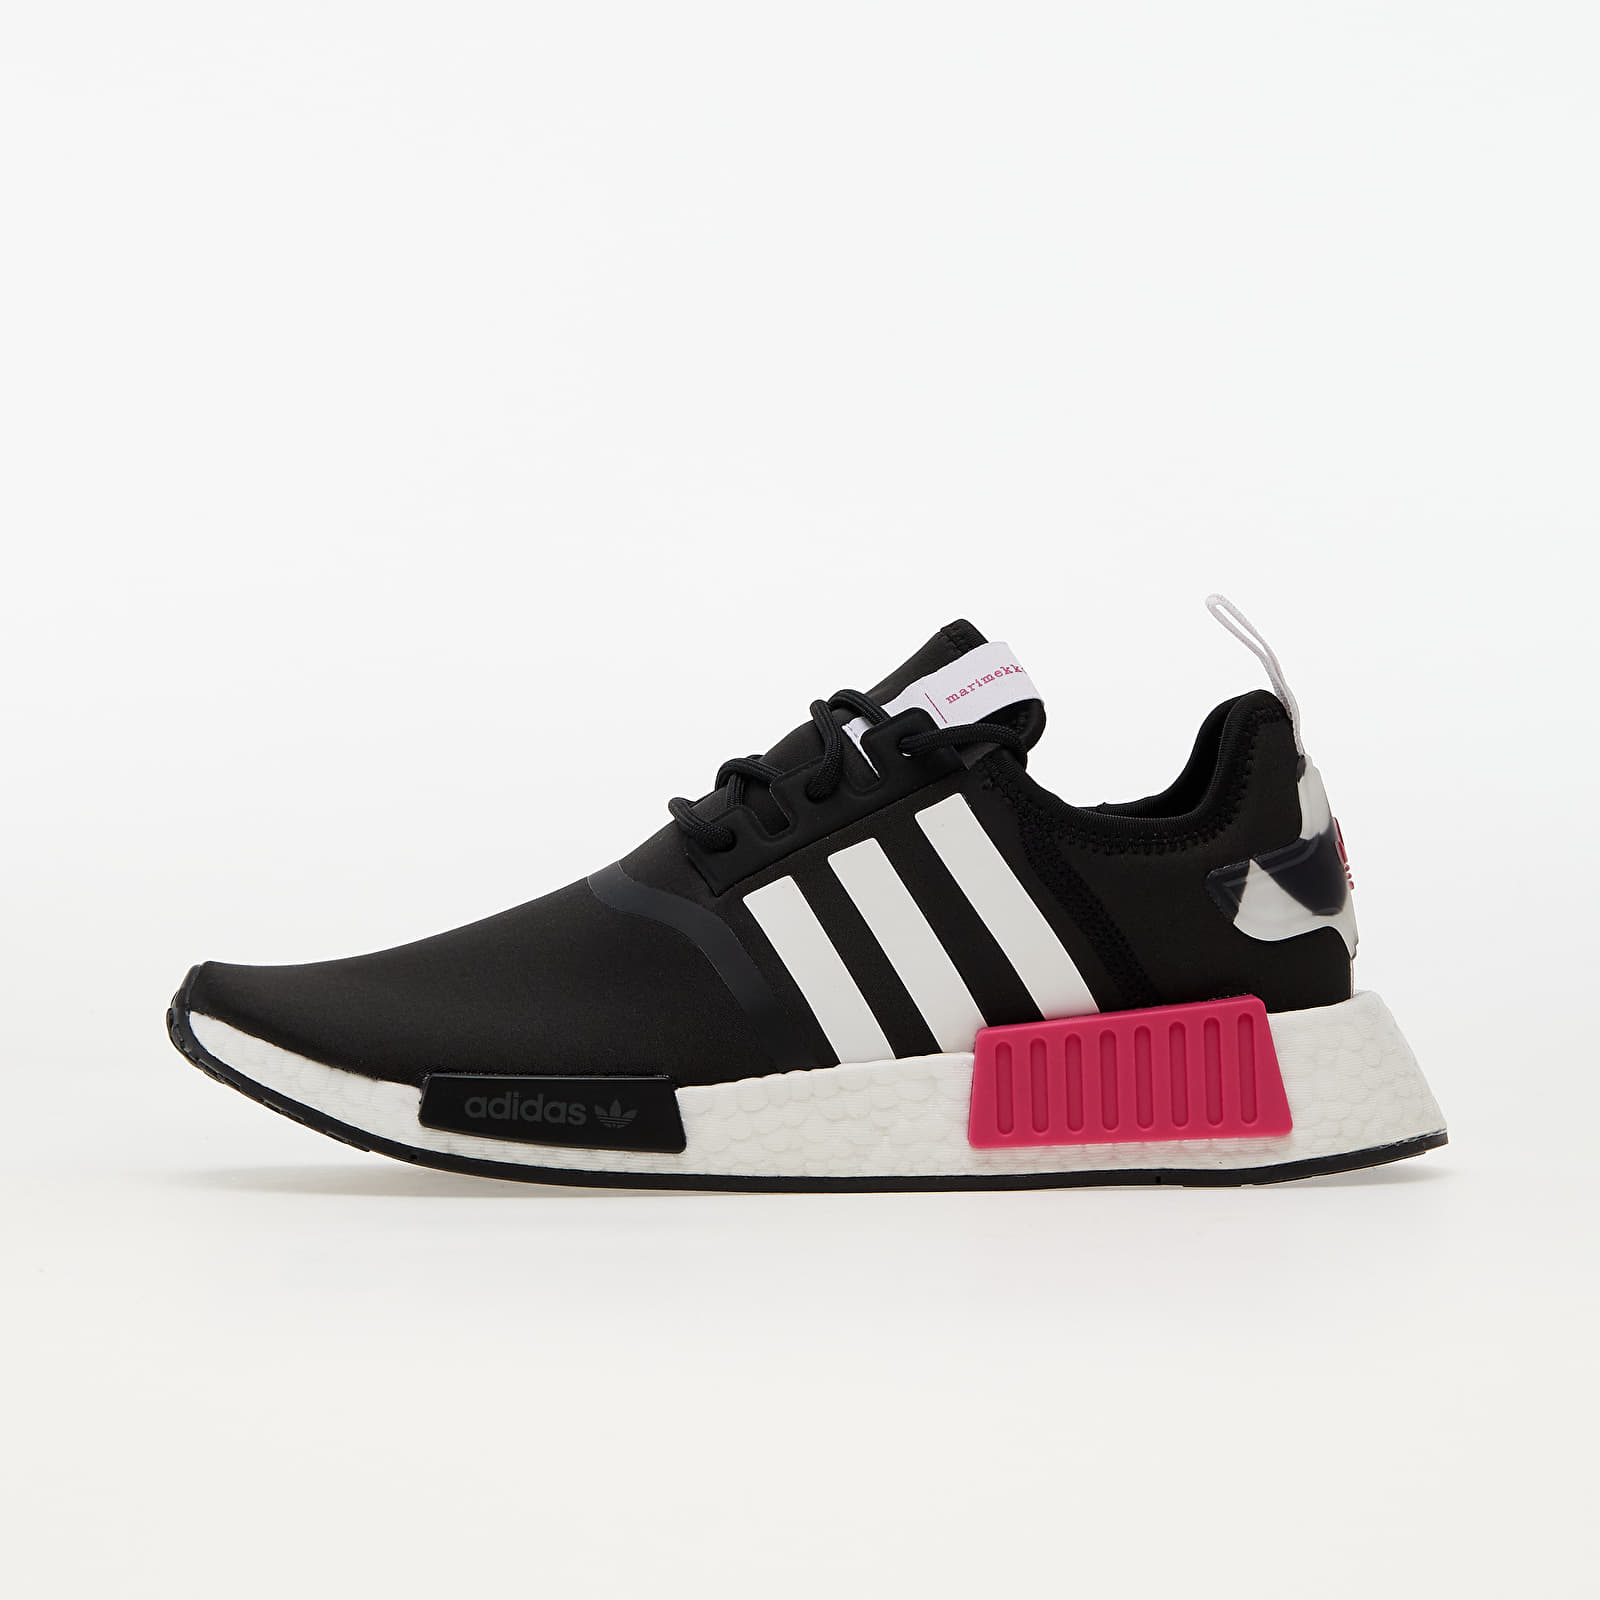 Dámske topánky a tenisky adidas NMD_R1 W Core Black/ Team Red Mate/ Ftw White